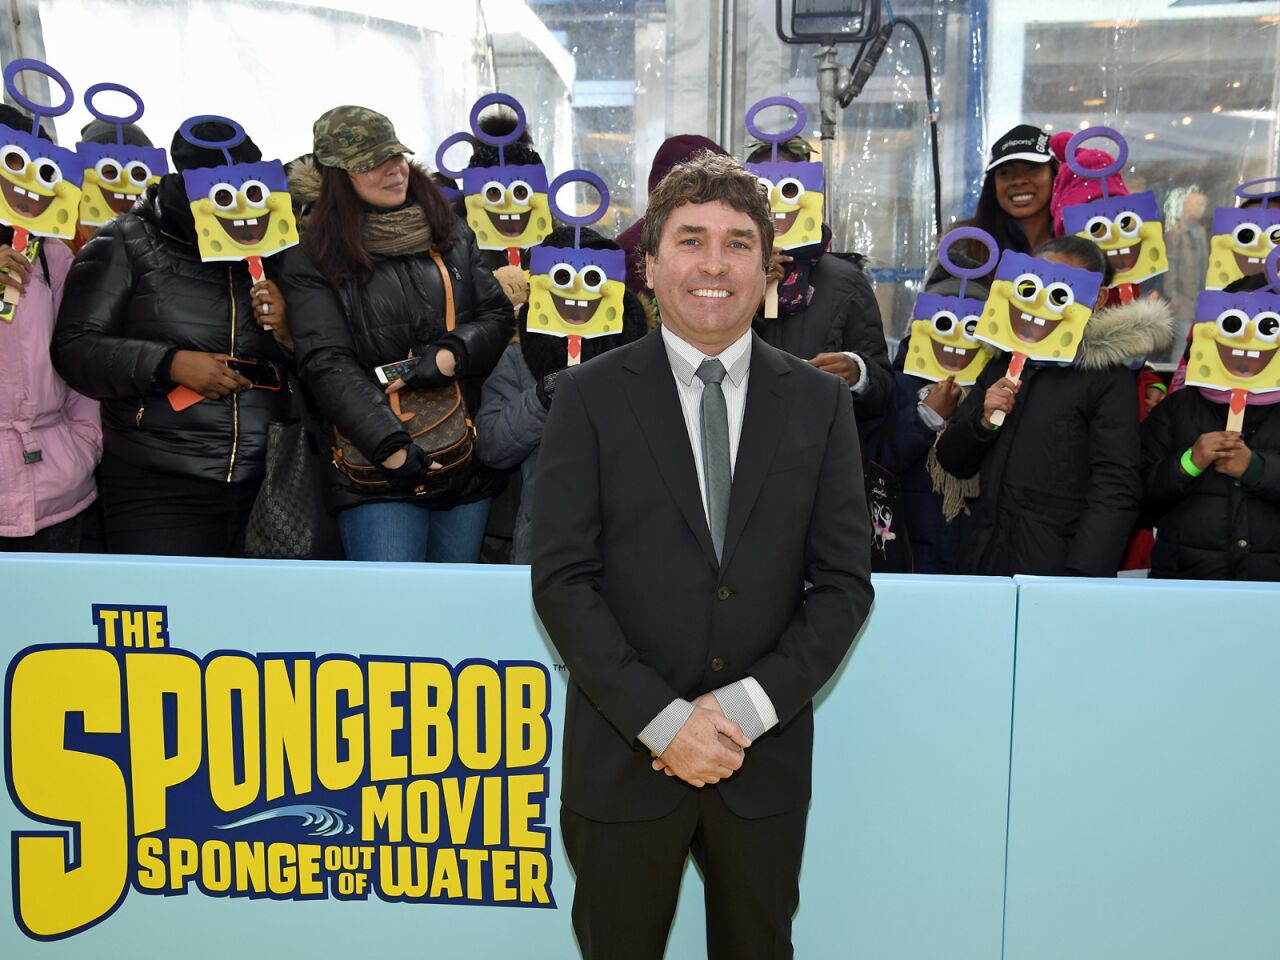 Stephen Hillenburg created the animated Nickelodeon series “SpongeBob SquarePants.” The show won Emmys in the U.S. and Britain, was translated into more than 60 languages and sparked huge merchandising opportunities worldwide. He was 57.